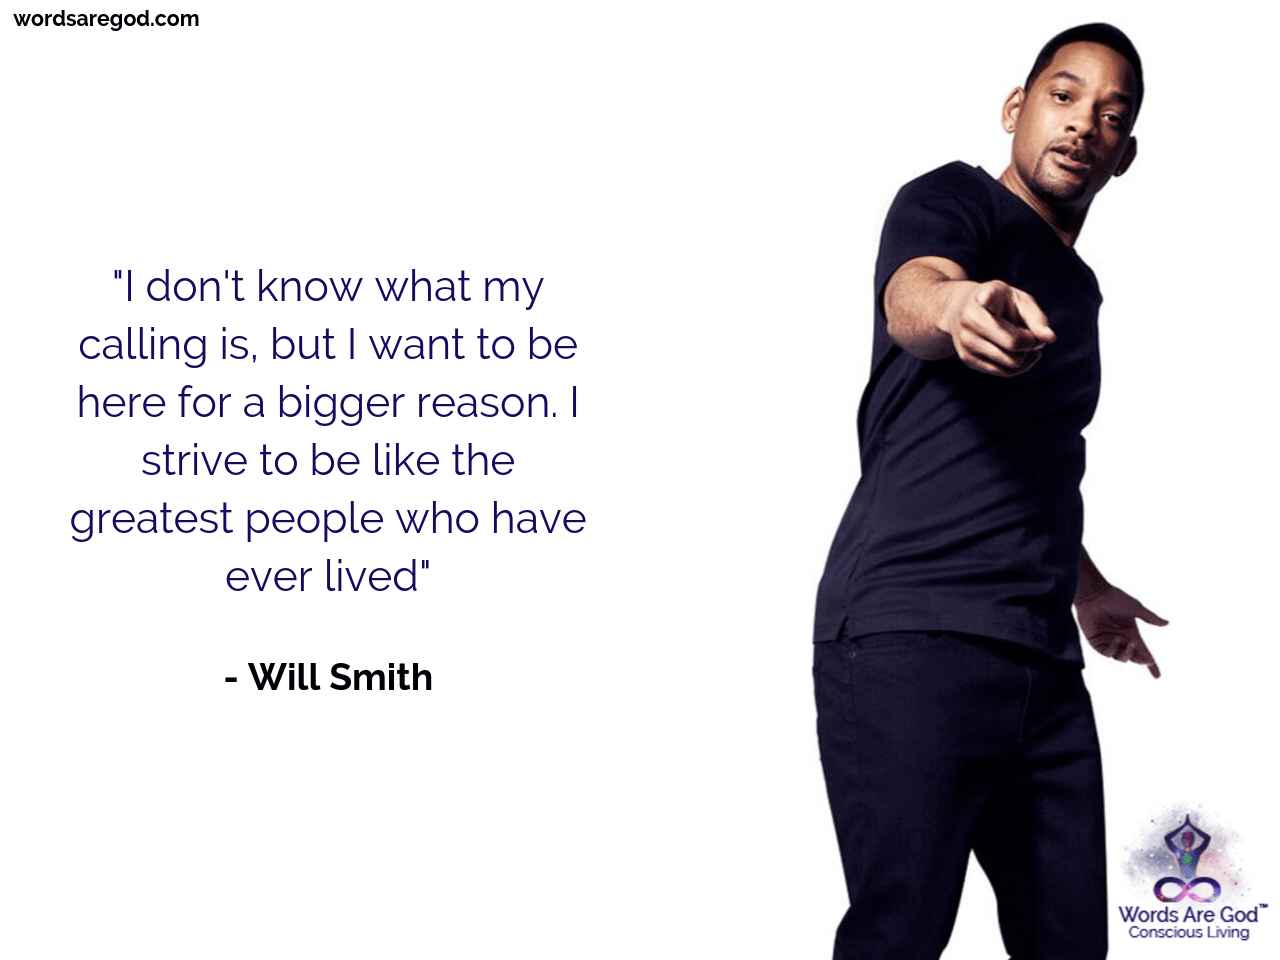 Will Smith Life Quote